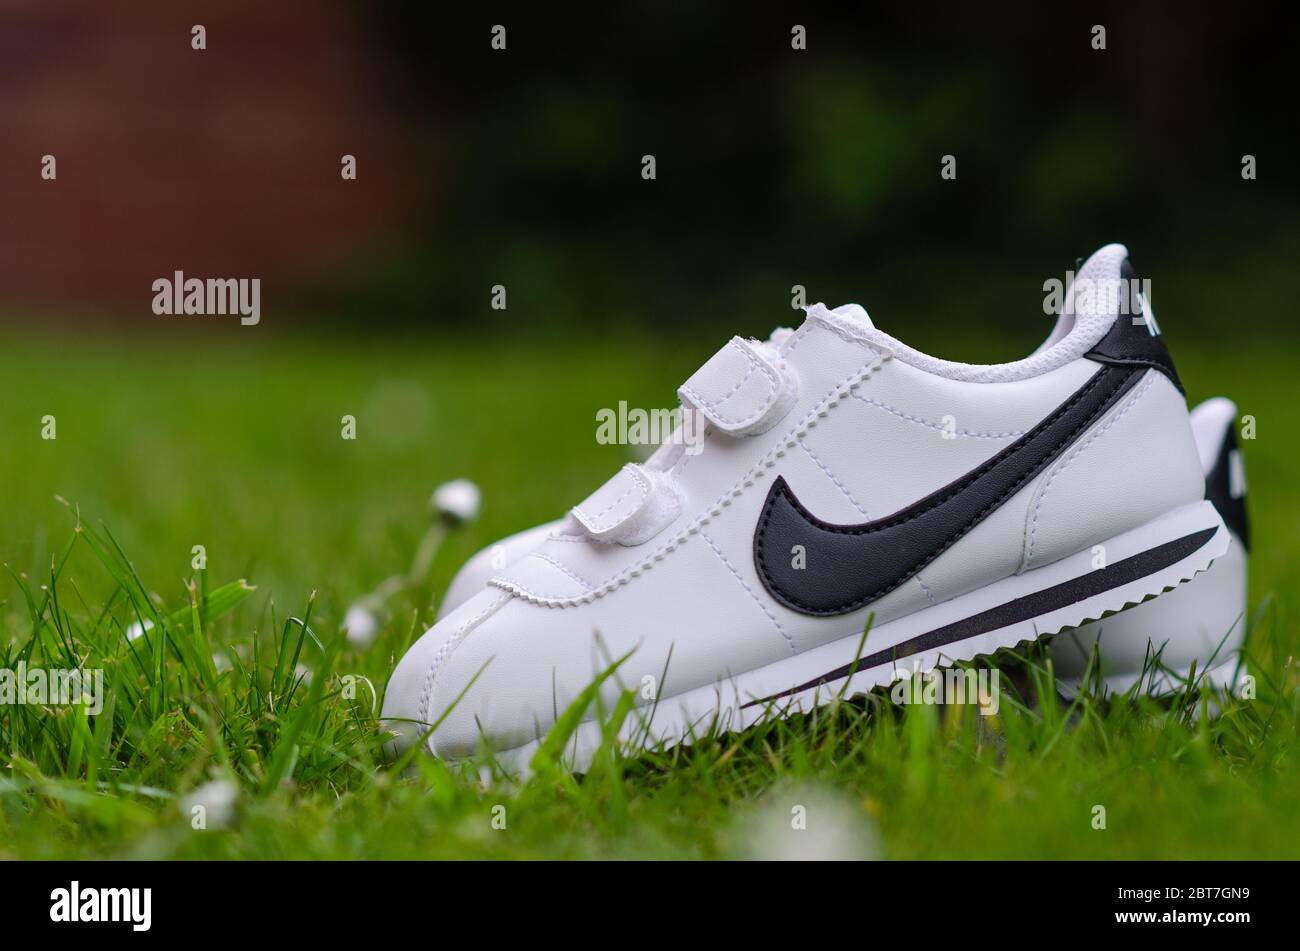 images of nike trainers